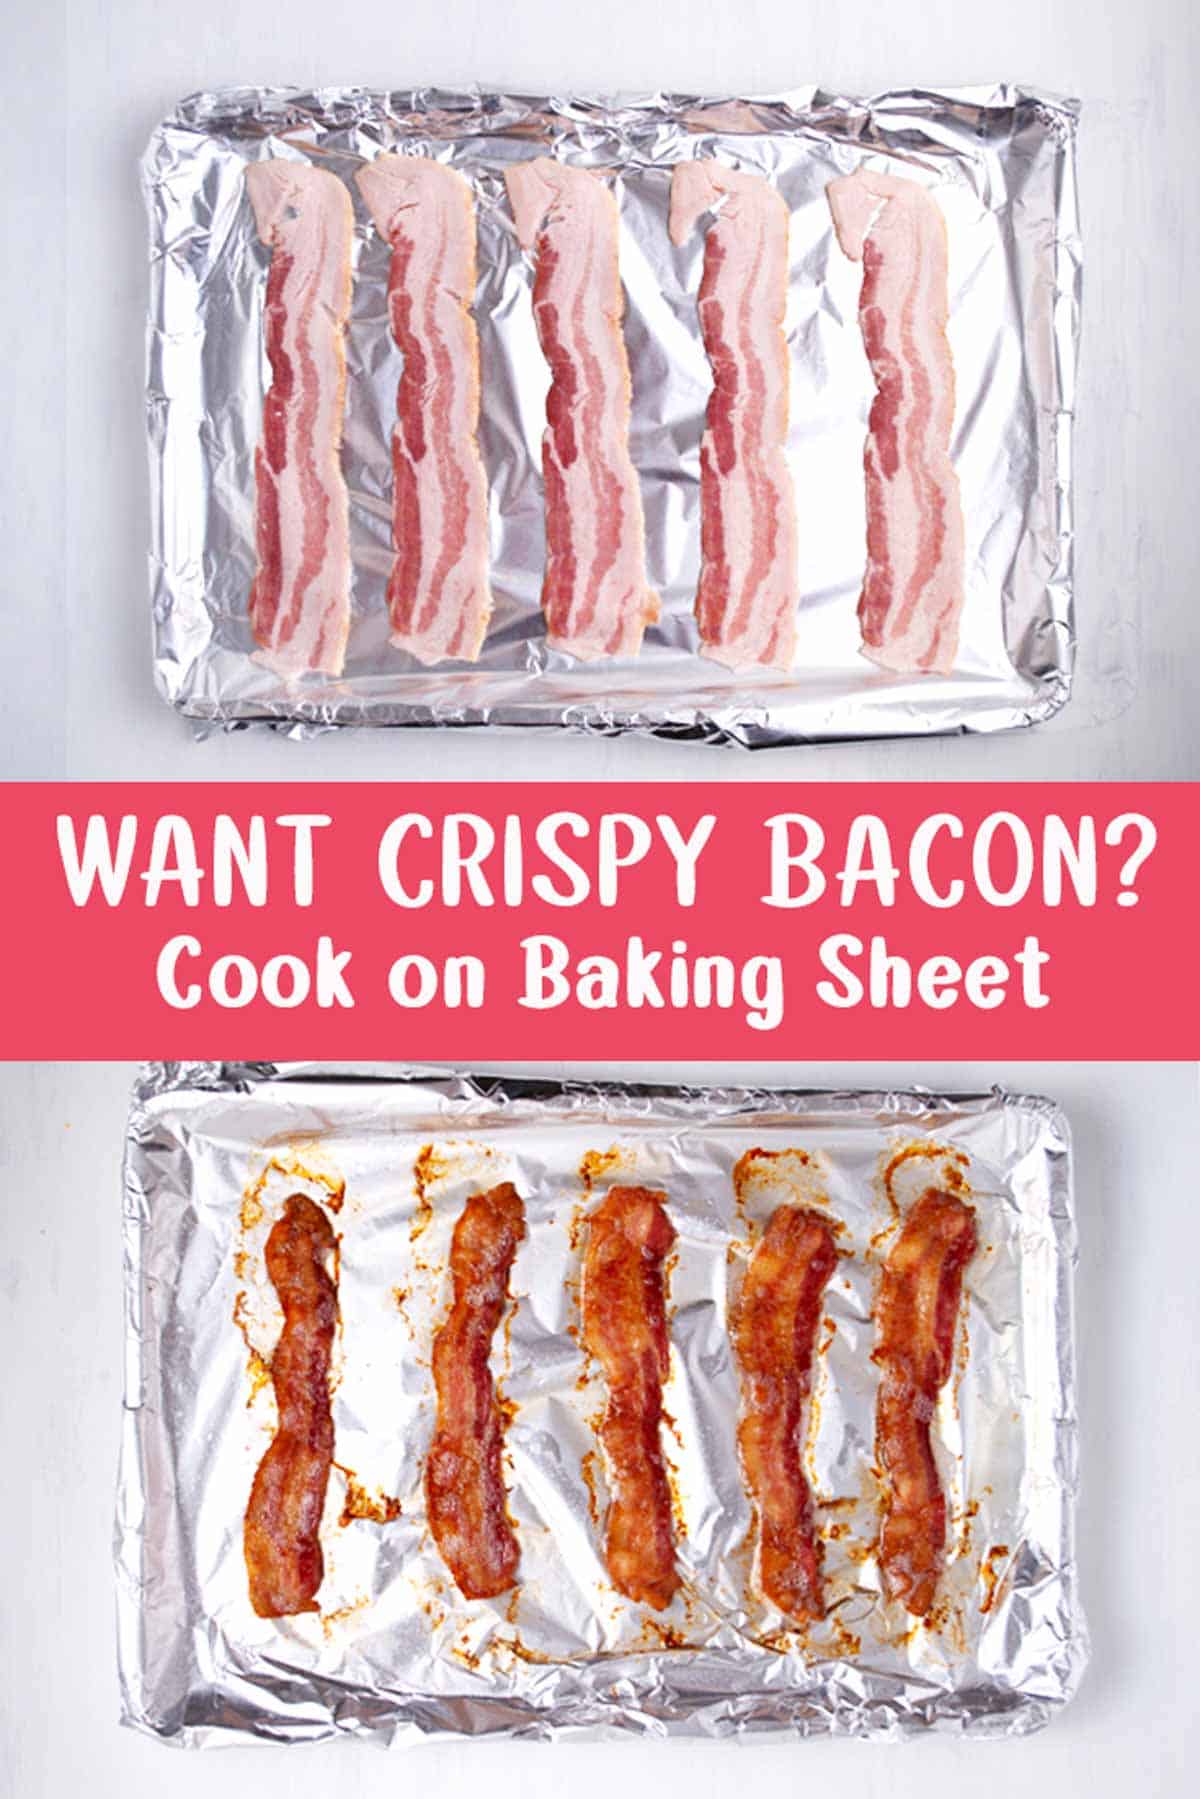 Raw bacon on a foil-lined baking sheet and cooked bacon on foil-lined pan.